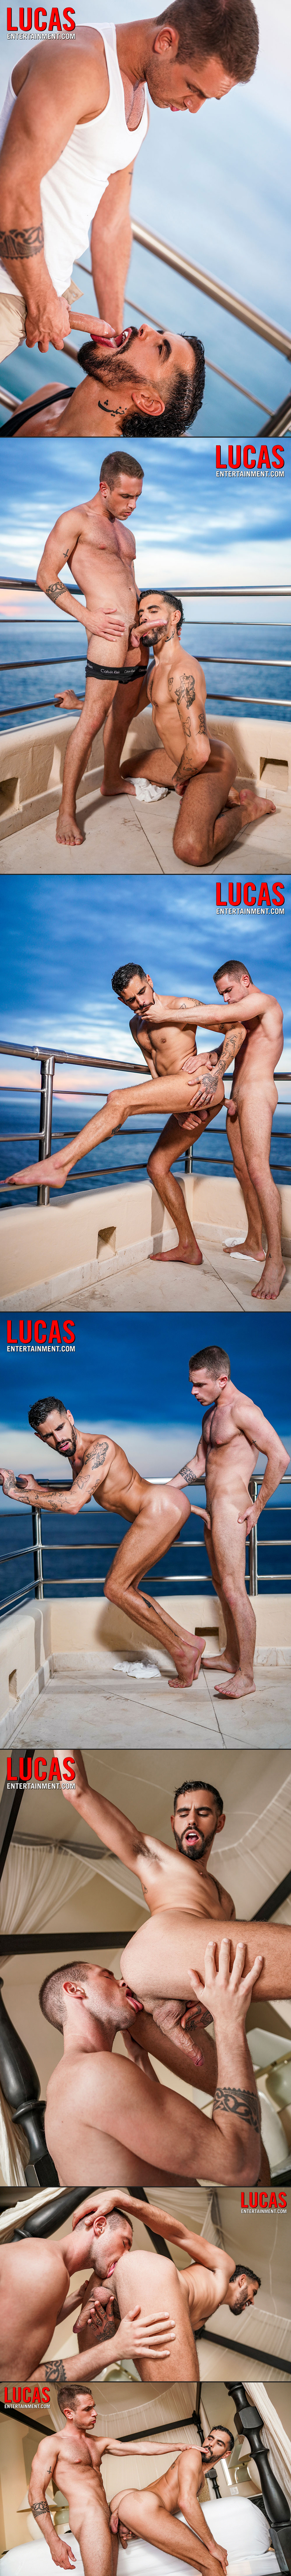 Bareback Auditions 17: Ready For Action, Scene 2 (Apolo Adrii Tops Valentin Amour at LucasEntertainment